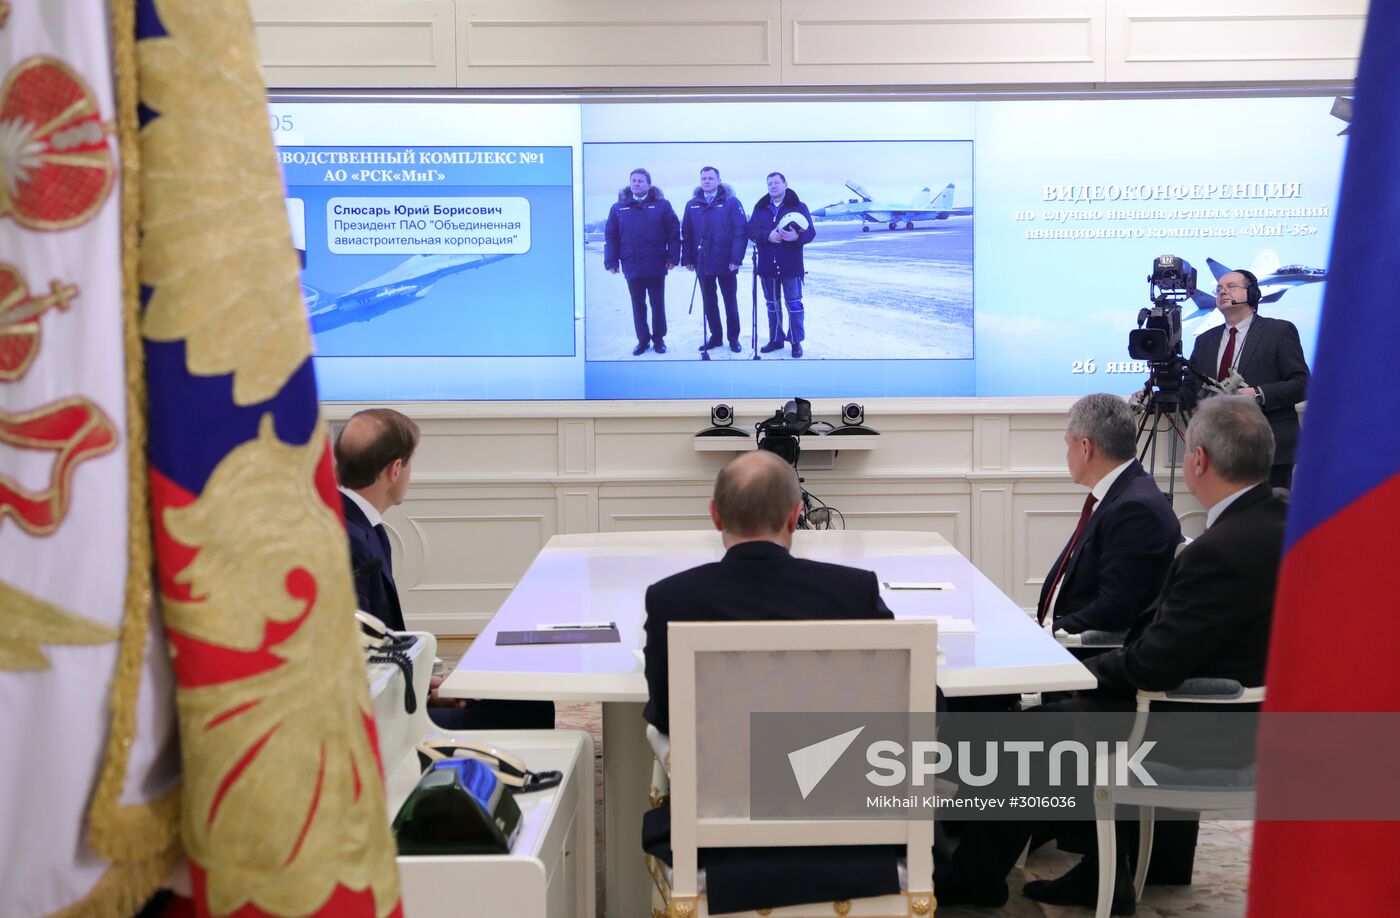 Russian President Vladimir Putin holds videoconference with MiG corporation